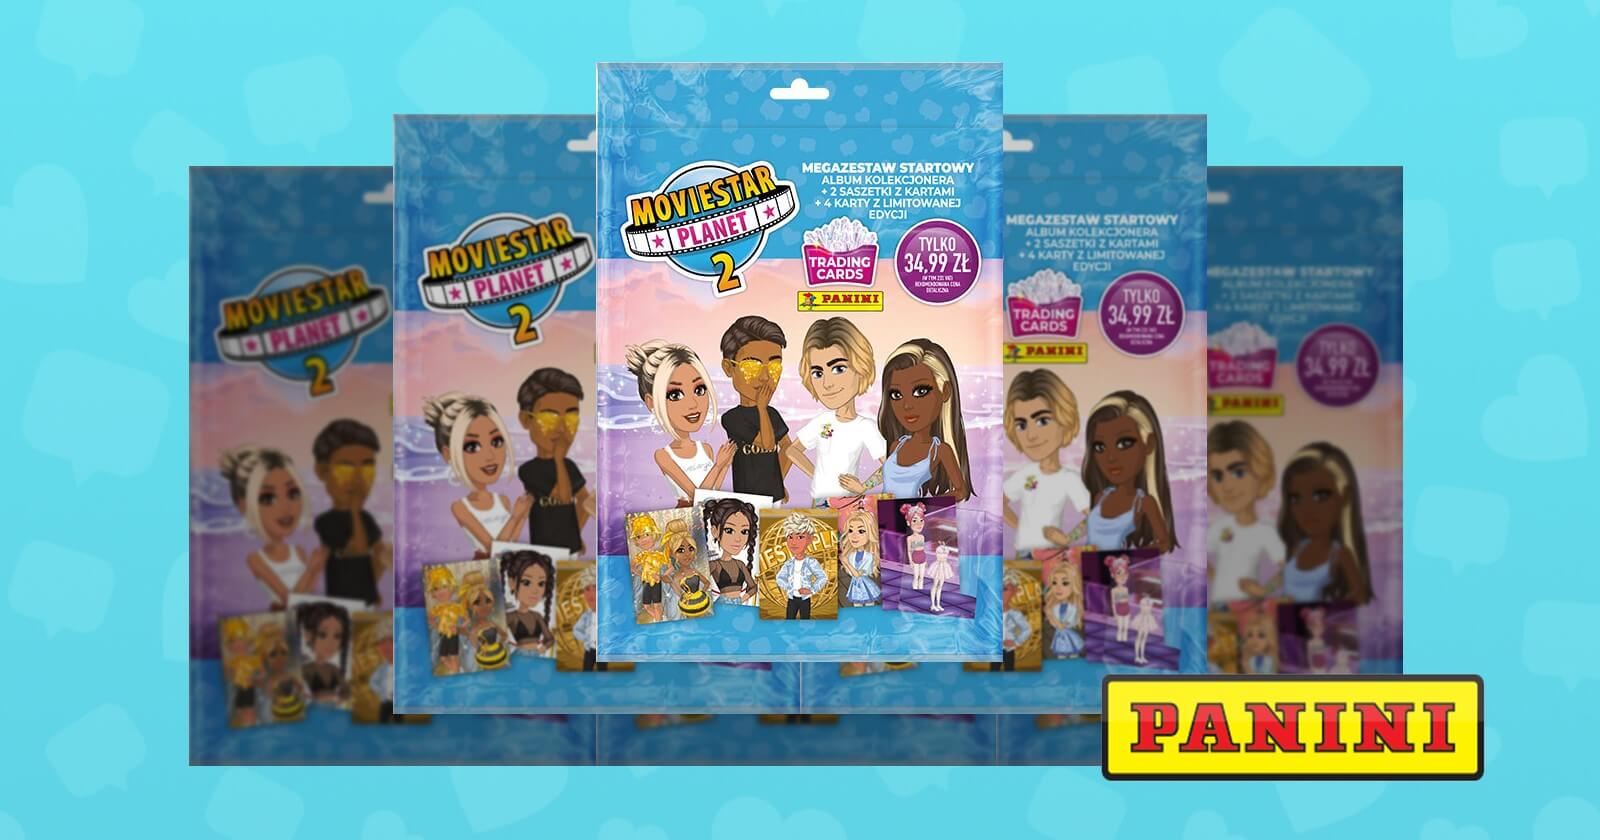 MovieStarPlanet Partners up with Panini to Launch Trading Cards in Poland image